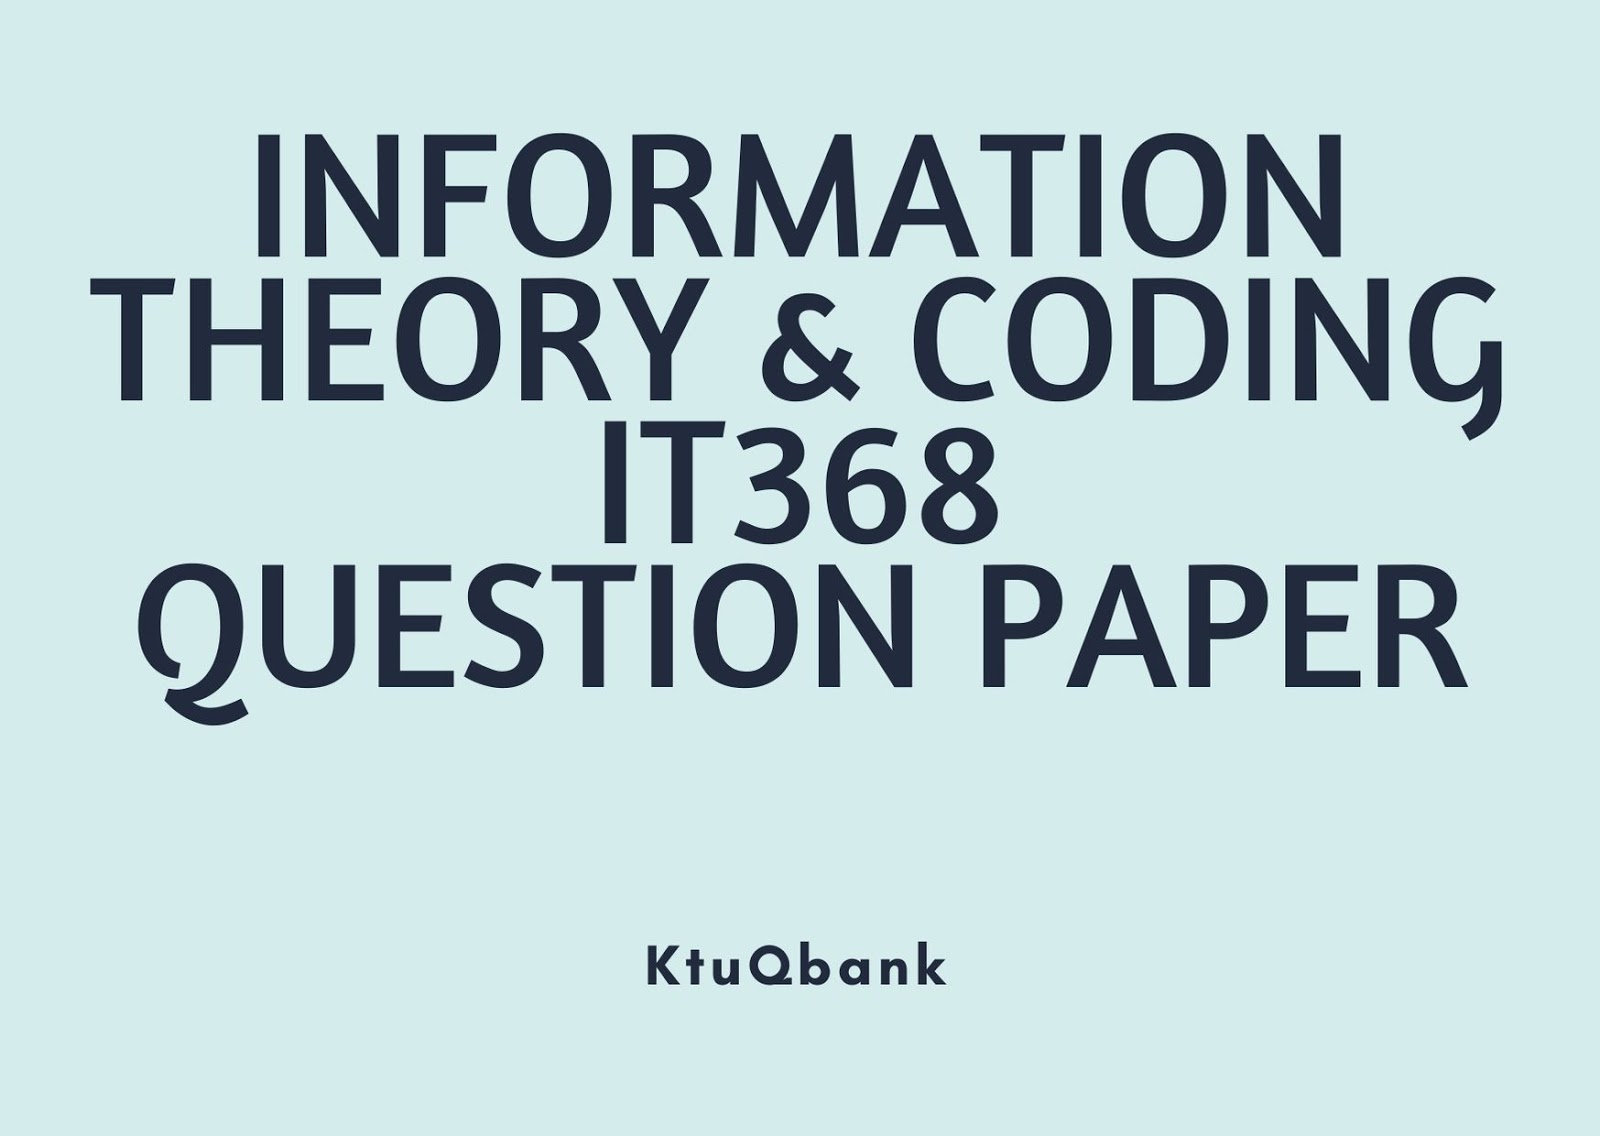 Information Theory & Coding | IT368 | Question Papers (2015 batch)